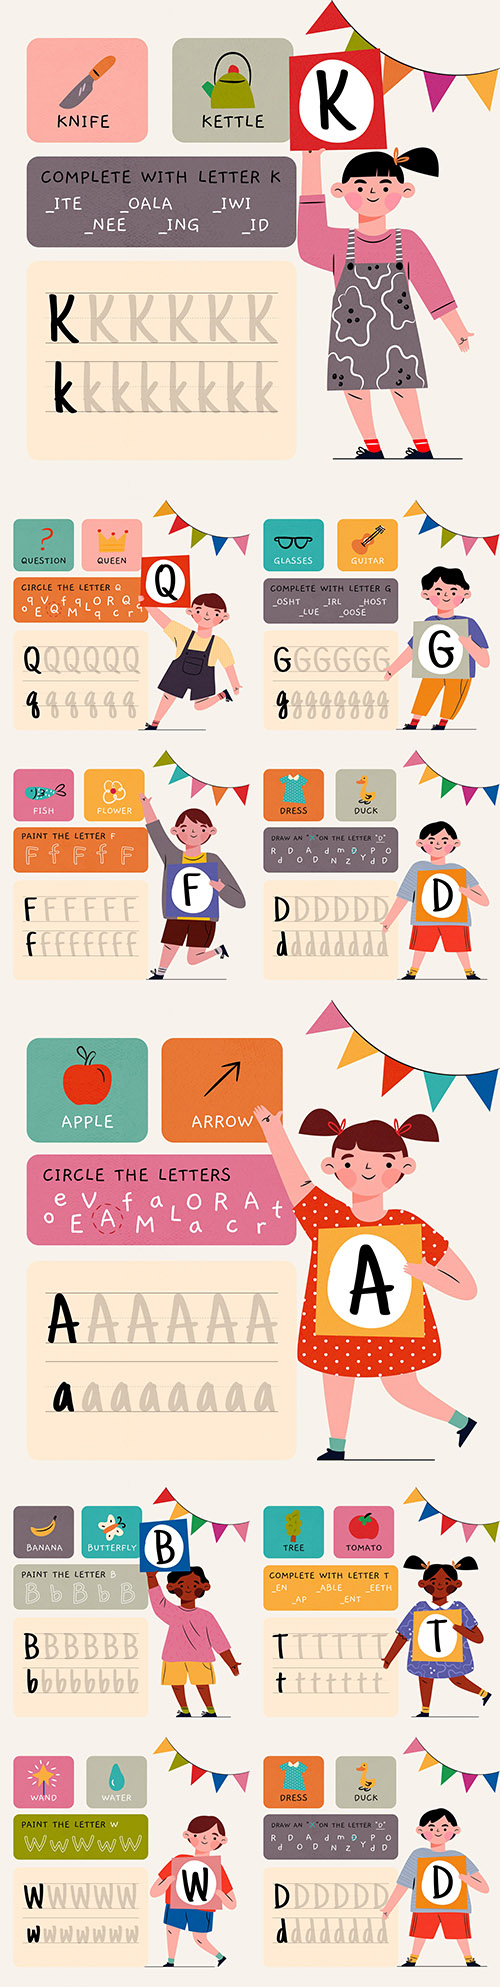 Alphabet letter word meaning and spelling illustrations
